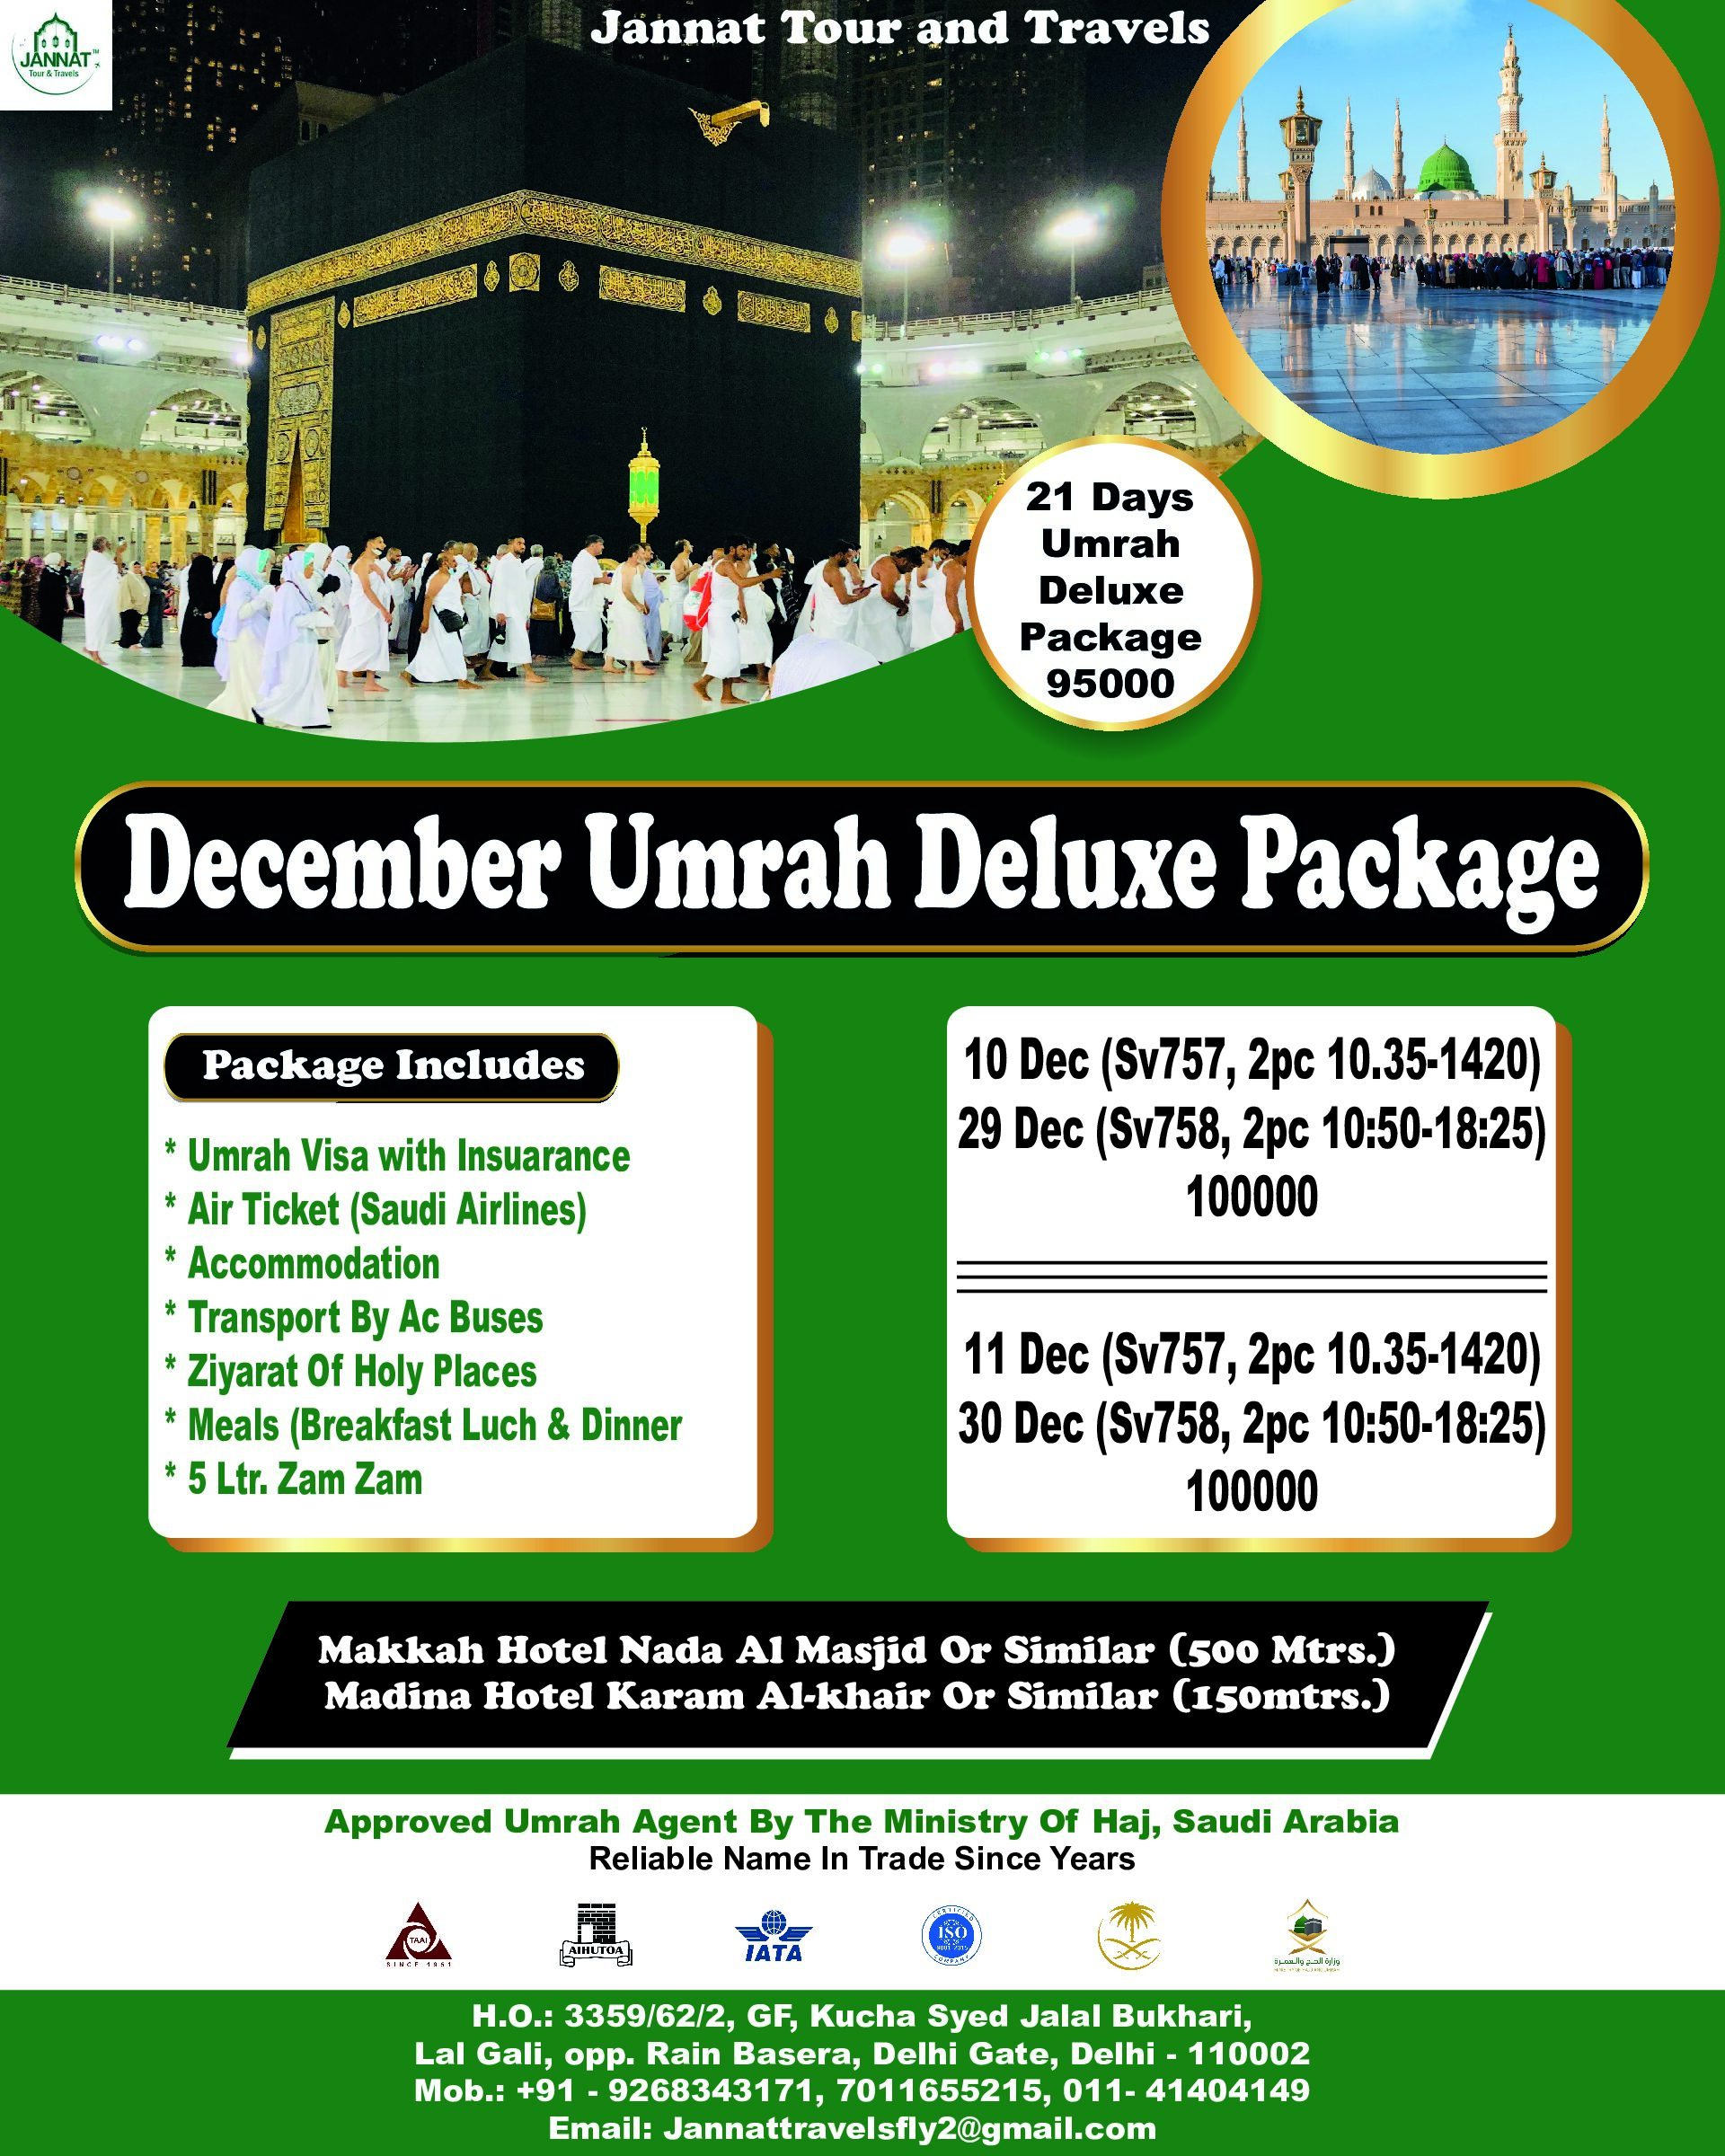 Umrah Deluxe Package